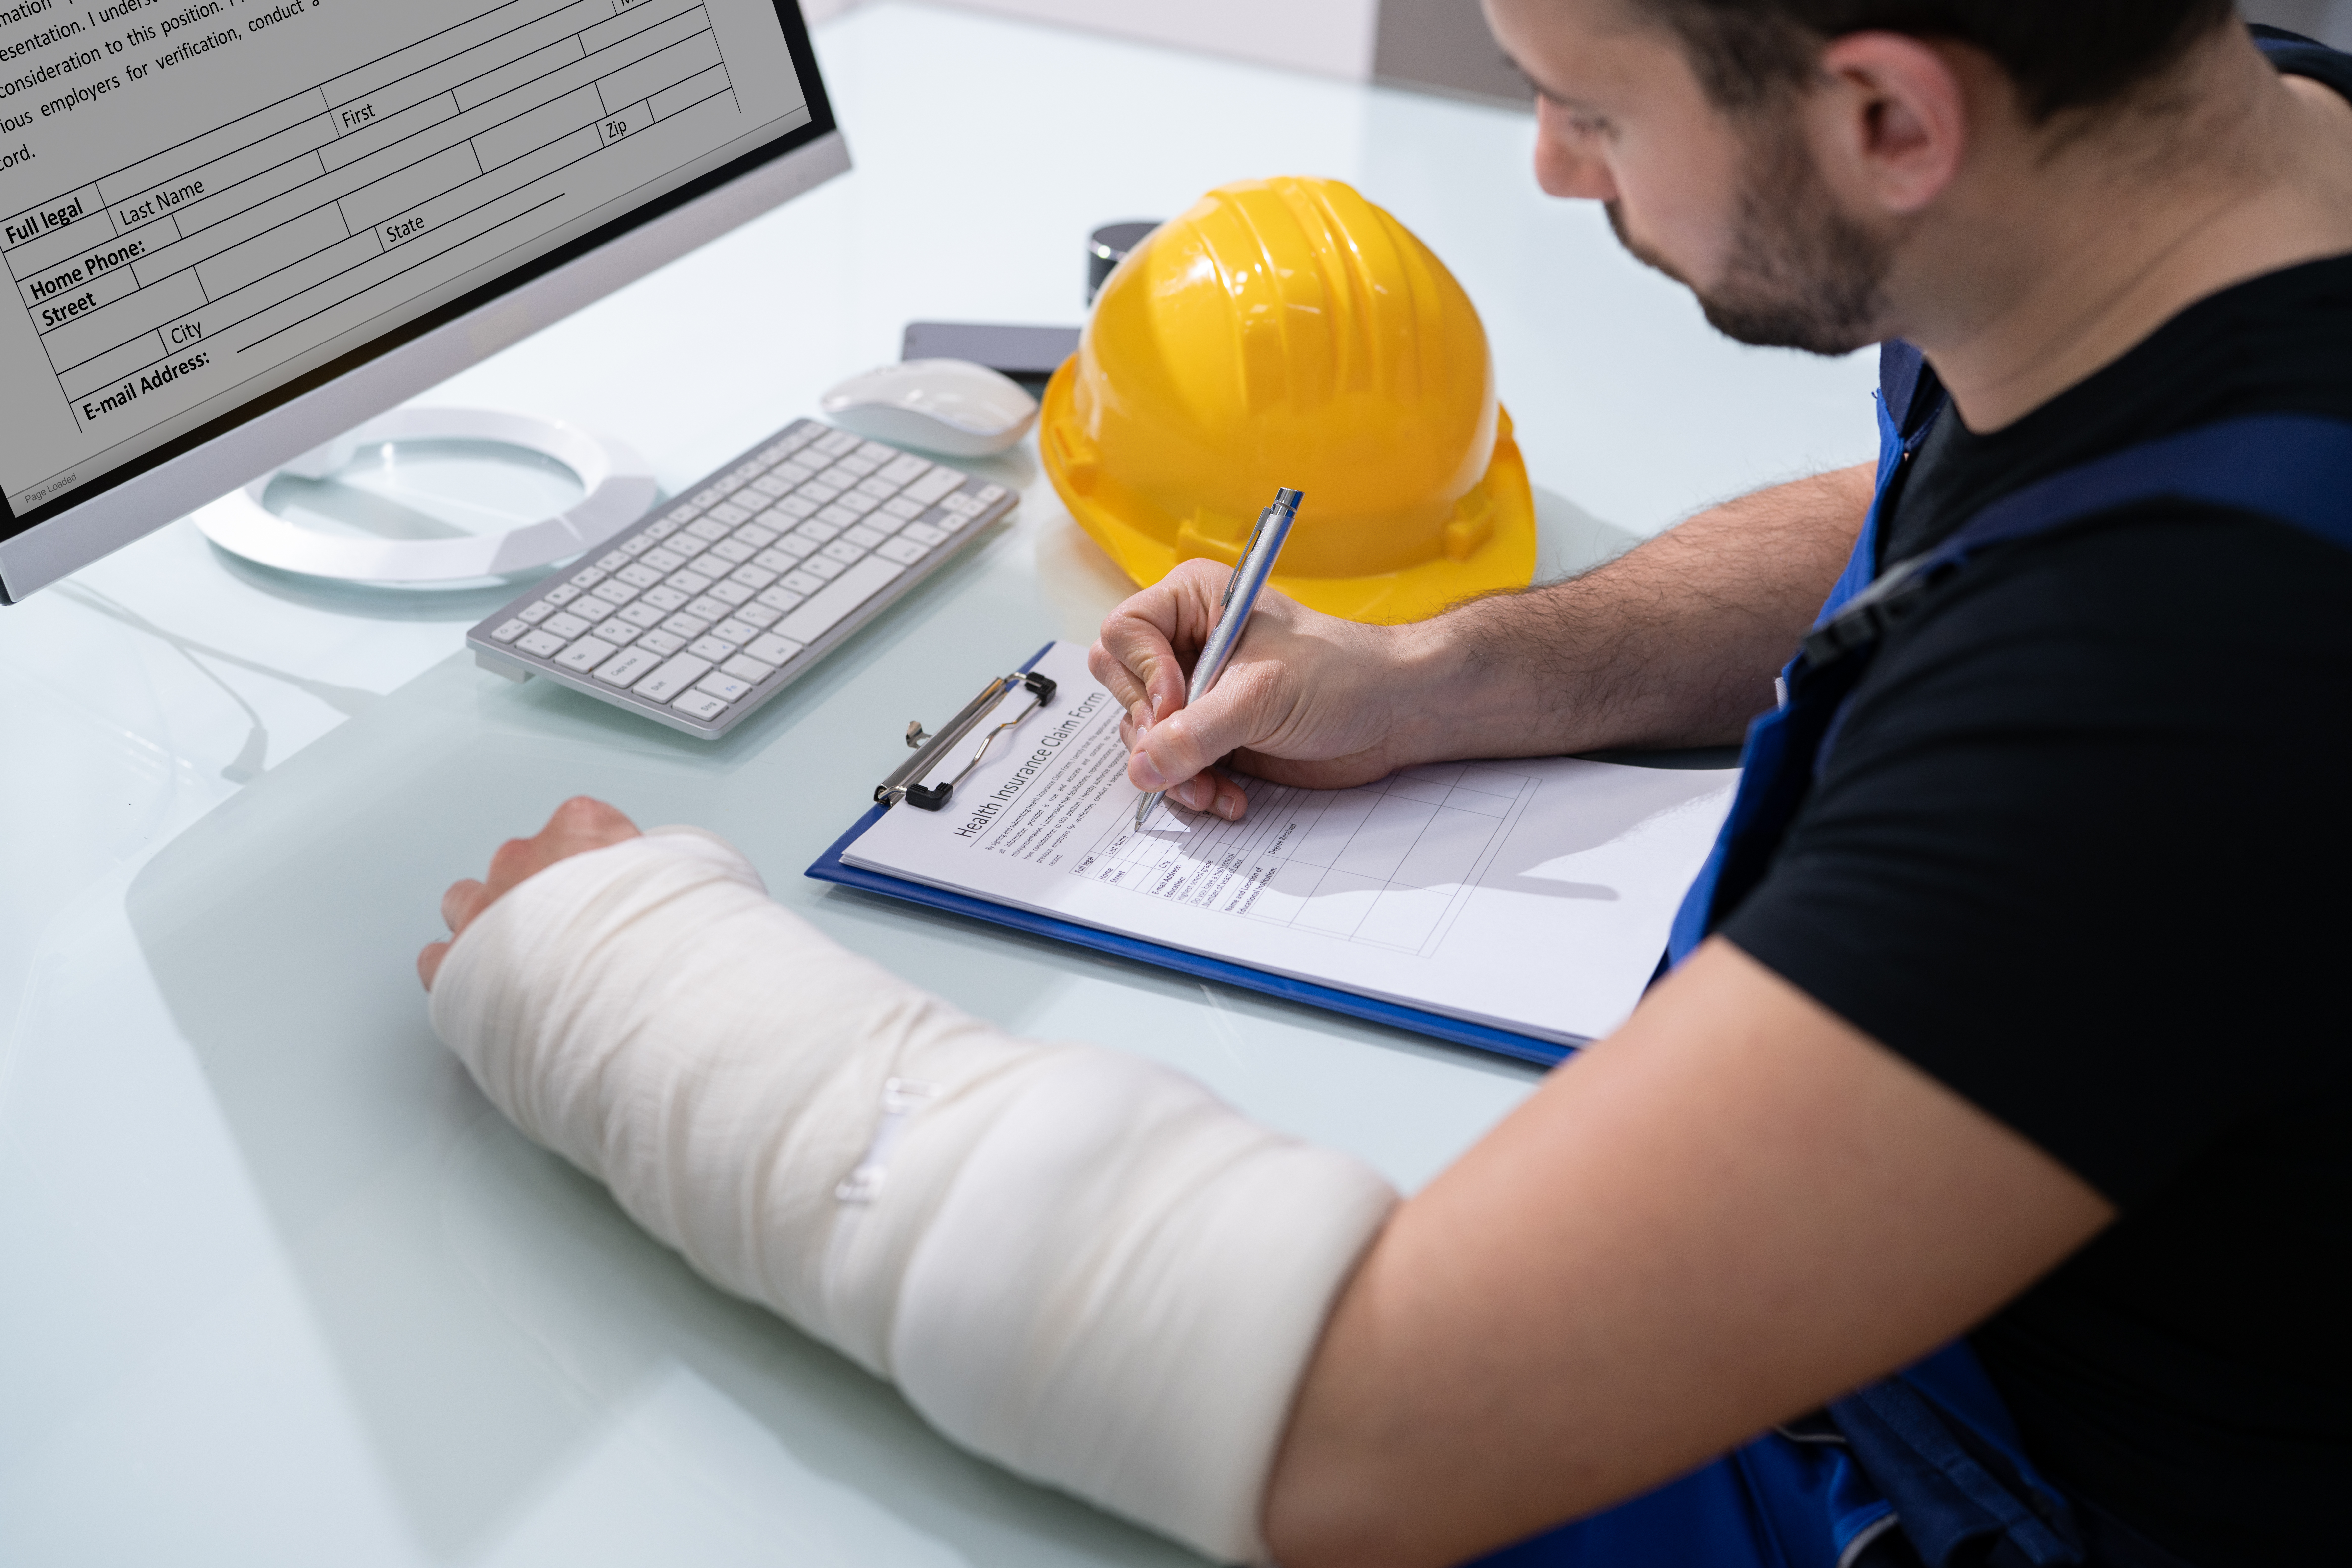 A worker with a yellow hard hat fills out medical informatino form with a cast around his arm